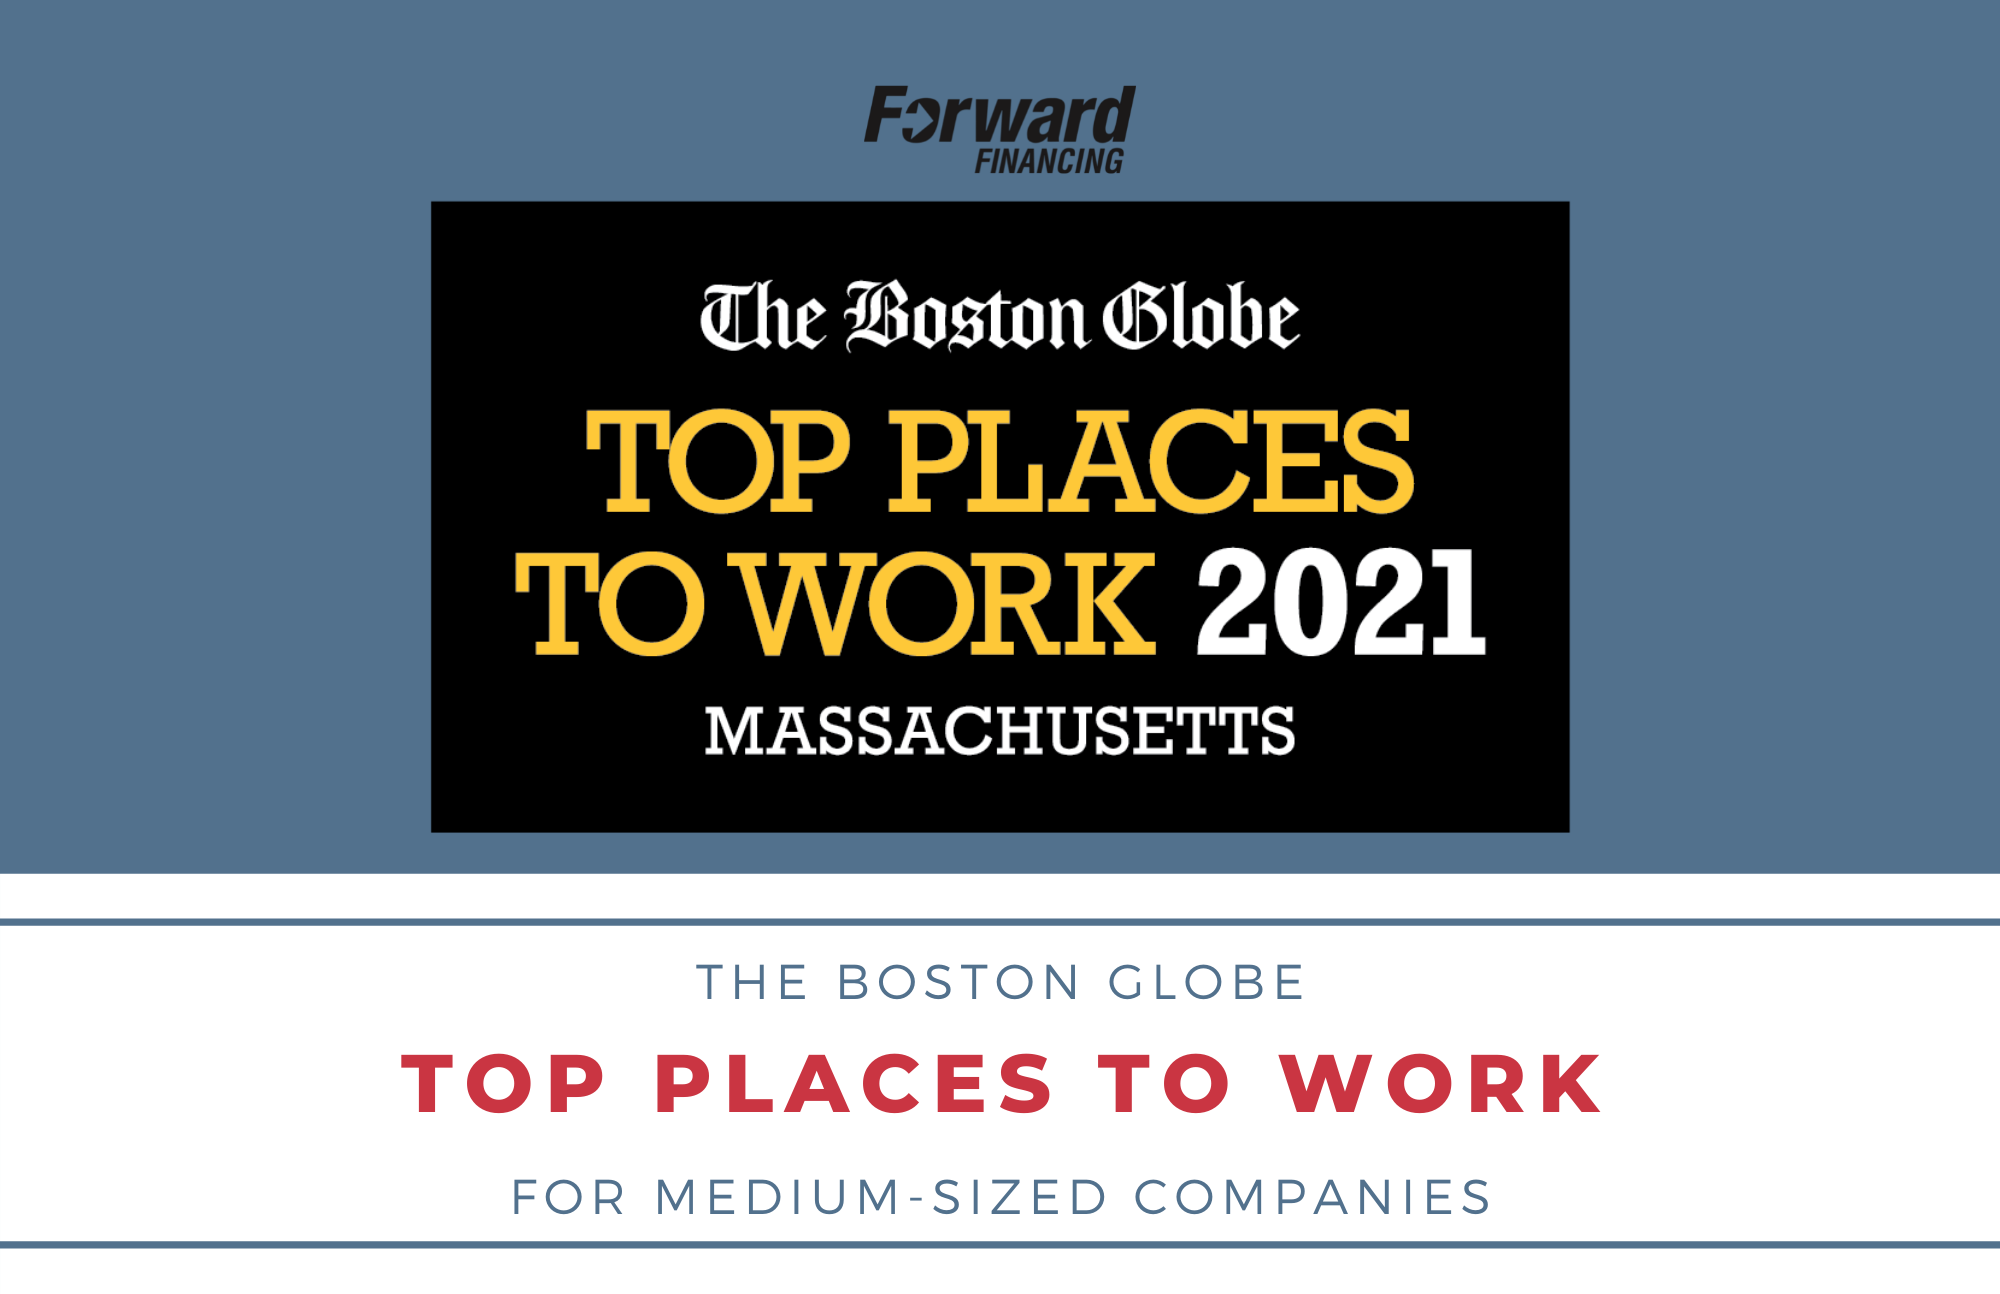 Forward Financing Named a 2021 Top Place to Work by The Boston Globe